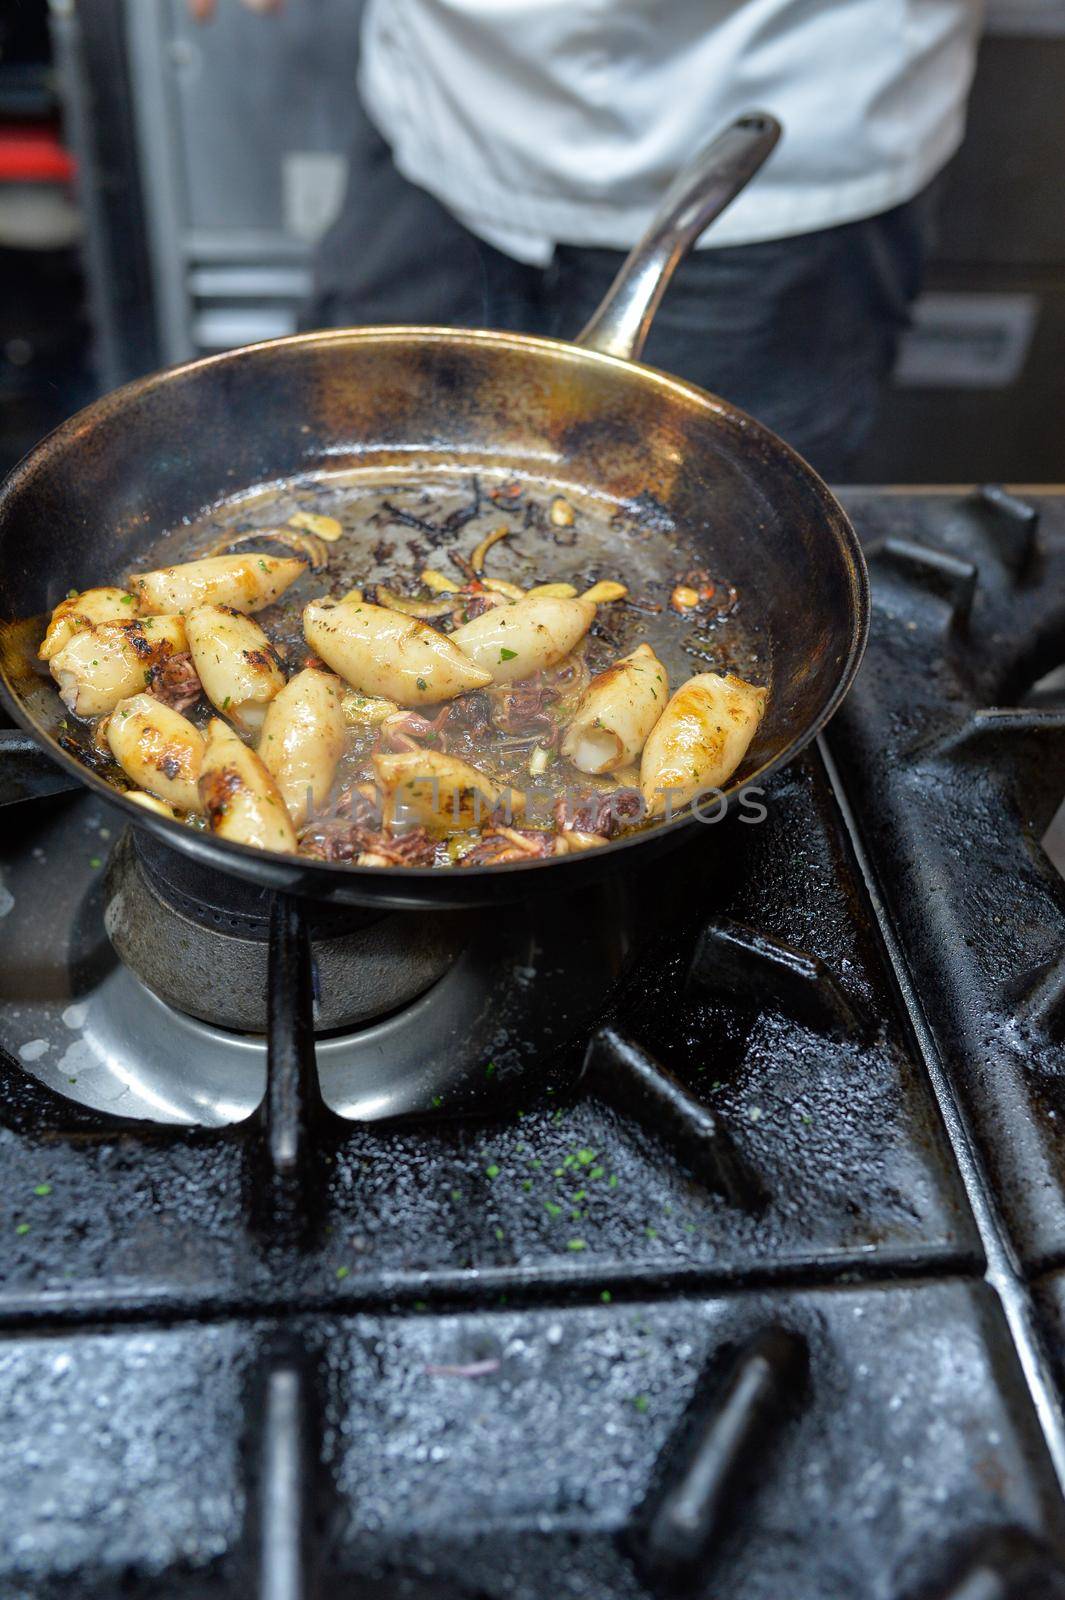 In a restaurant kitchen, calamari are grilled by the chef on a gas stove.